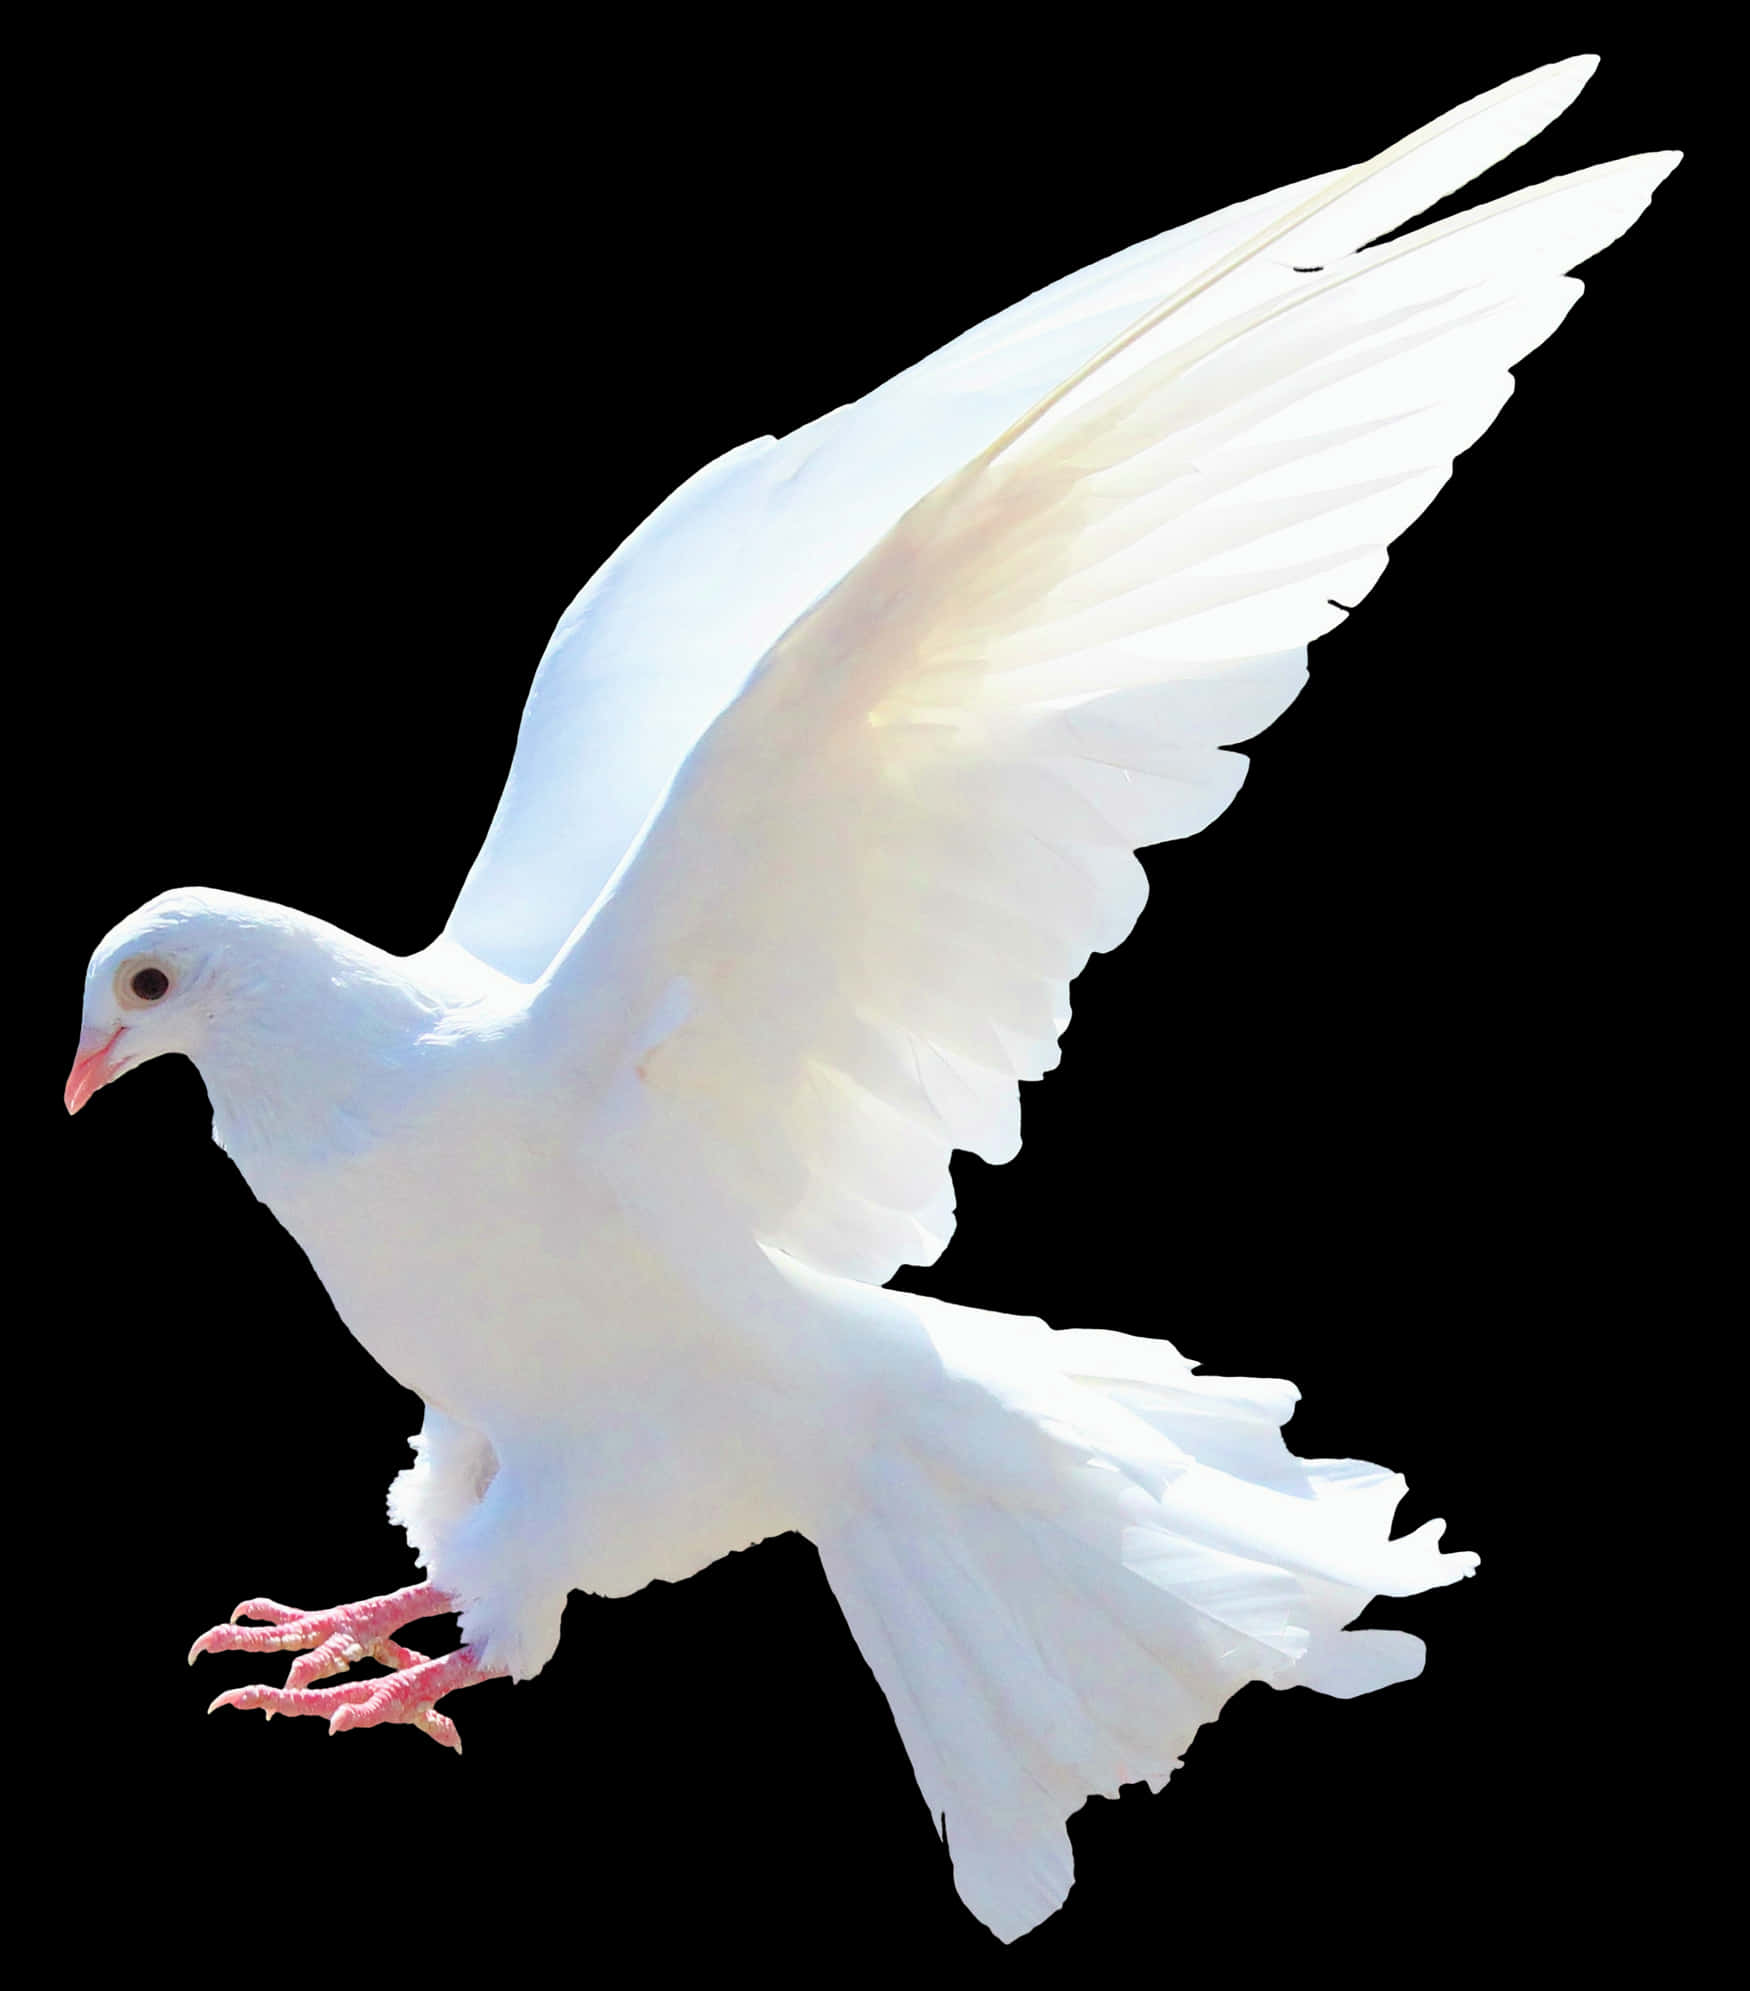 A White Dove With Its Wings Spread